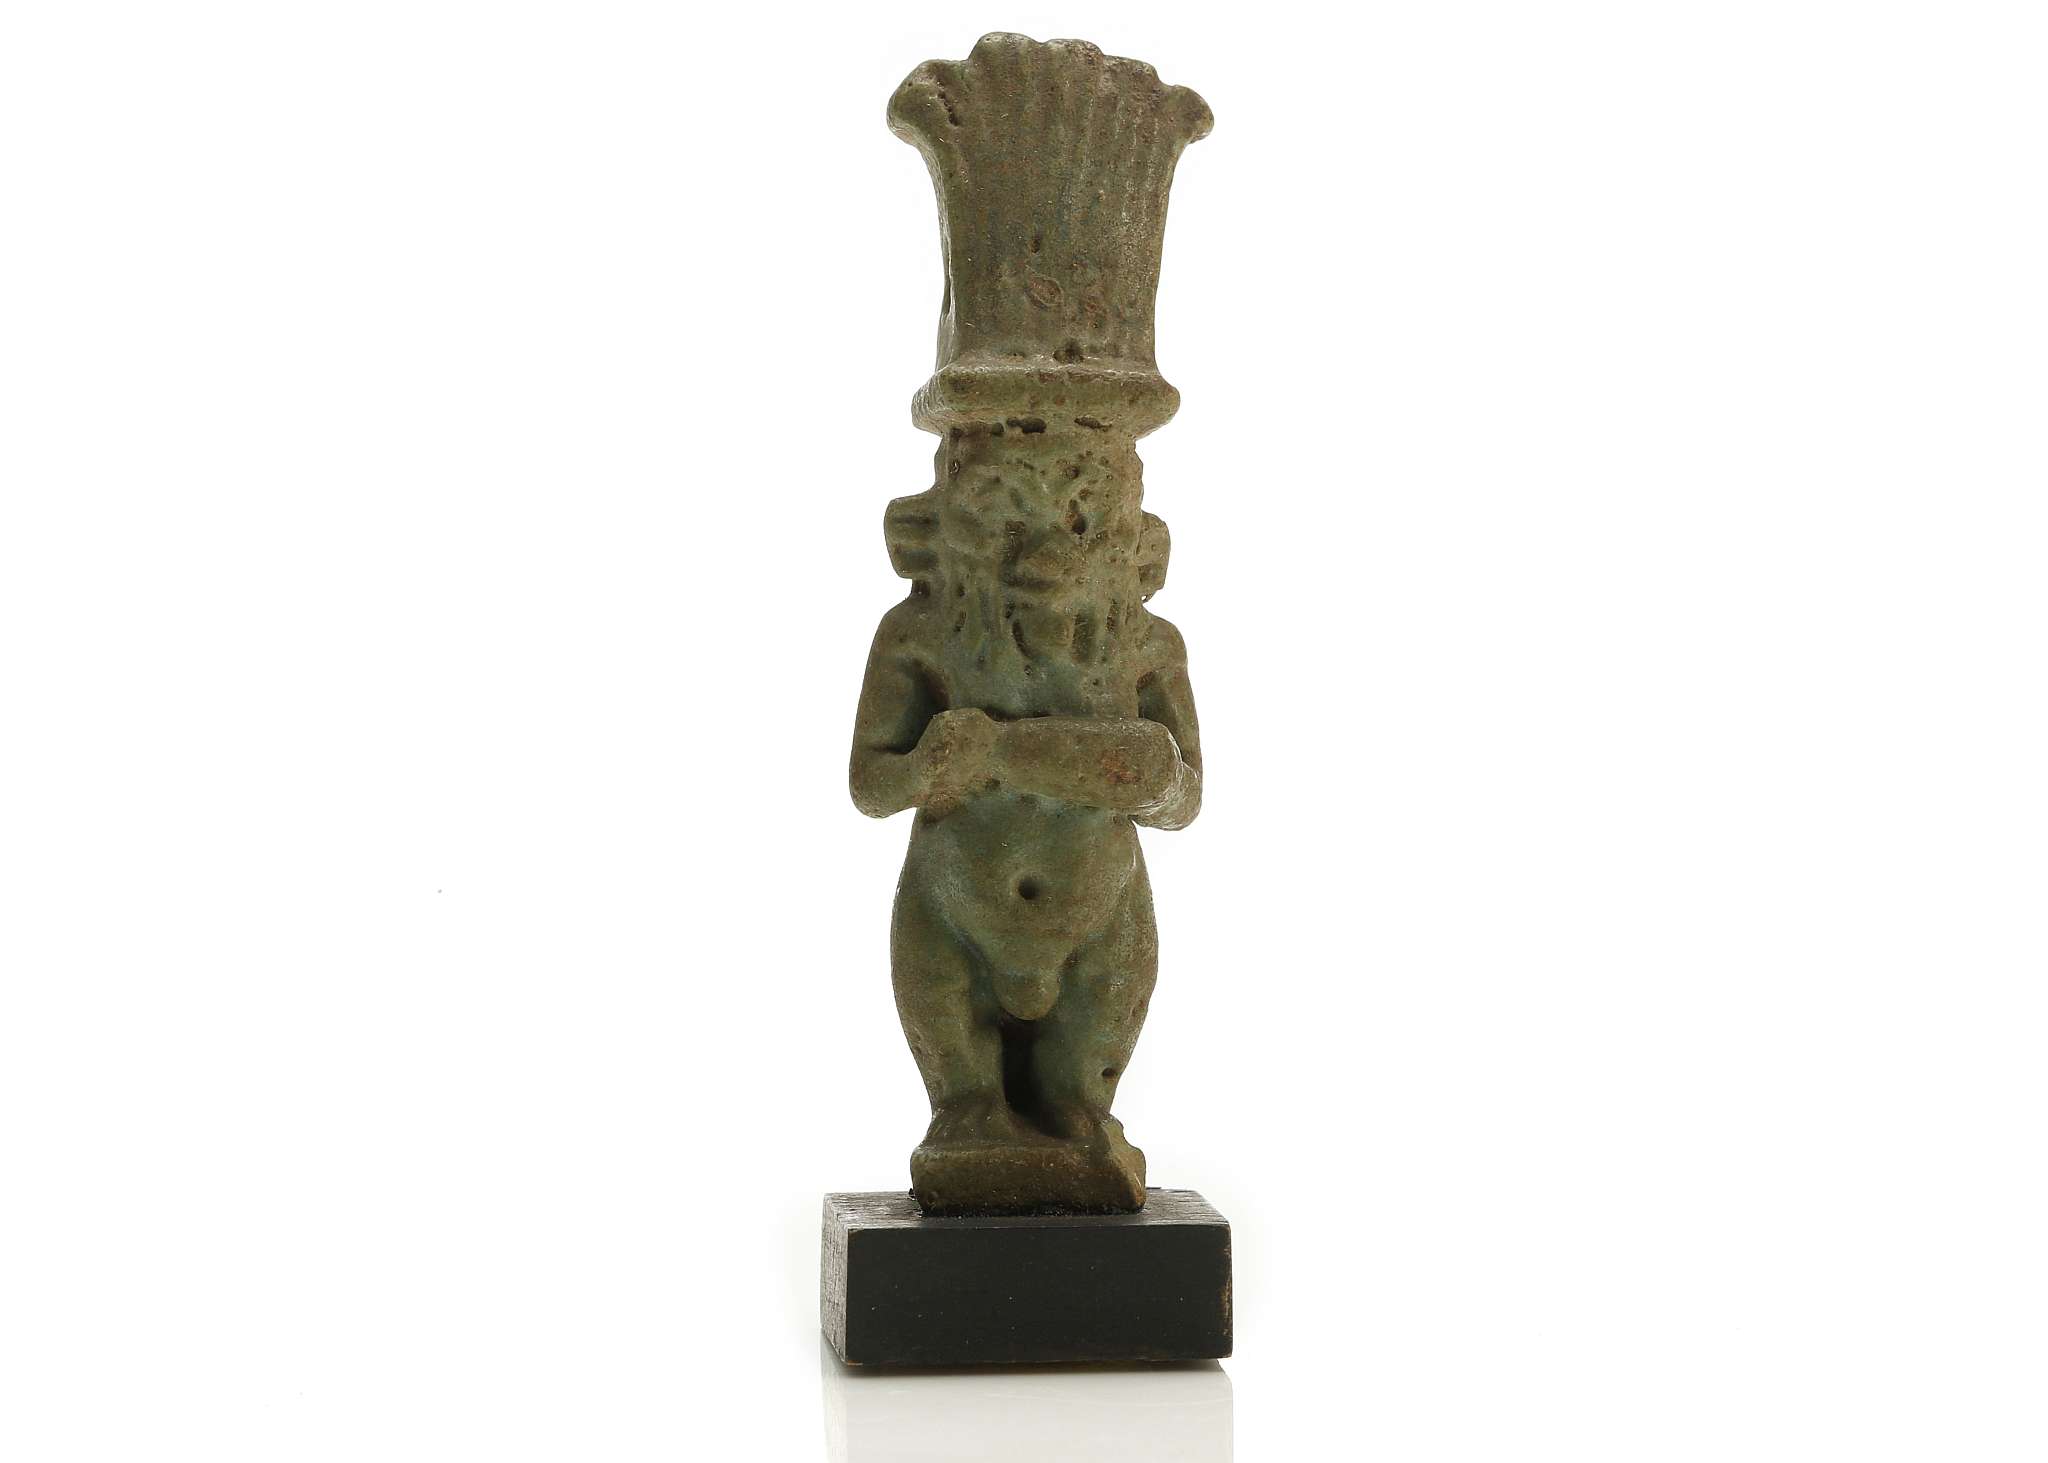 AN EGYPTIAN GLAZED COMPOSITION AMULET OF BES Late Period, circa 664-332 B.C. The dwarf god is